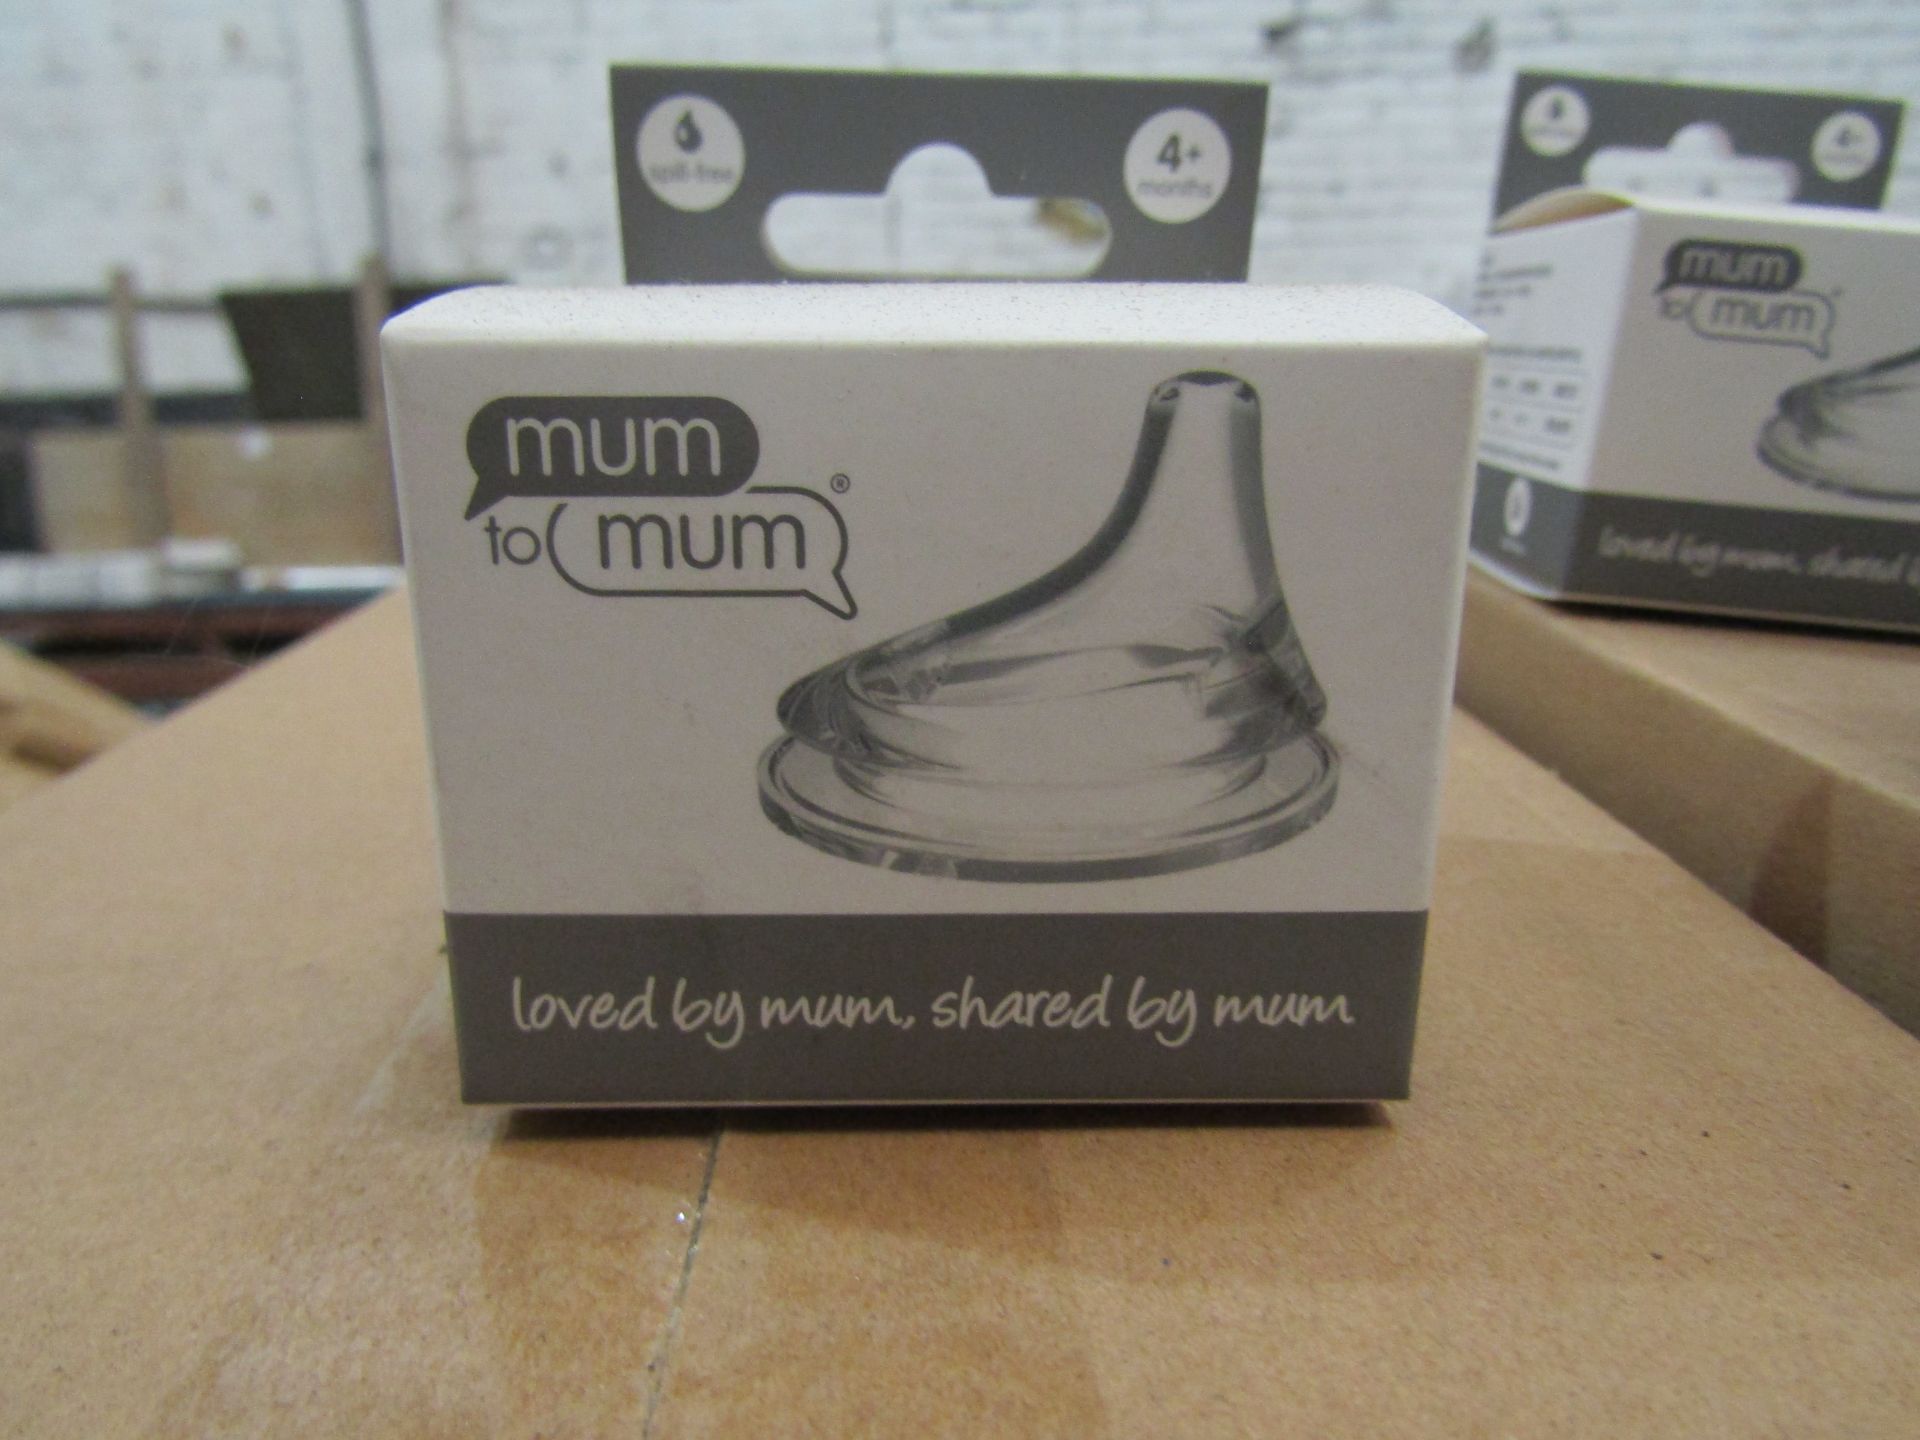 24x Mum To Mum 4 Month Plus Silicone Spout Spill Free, New & Packaged